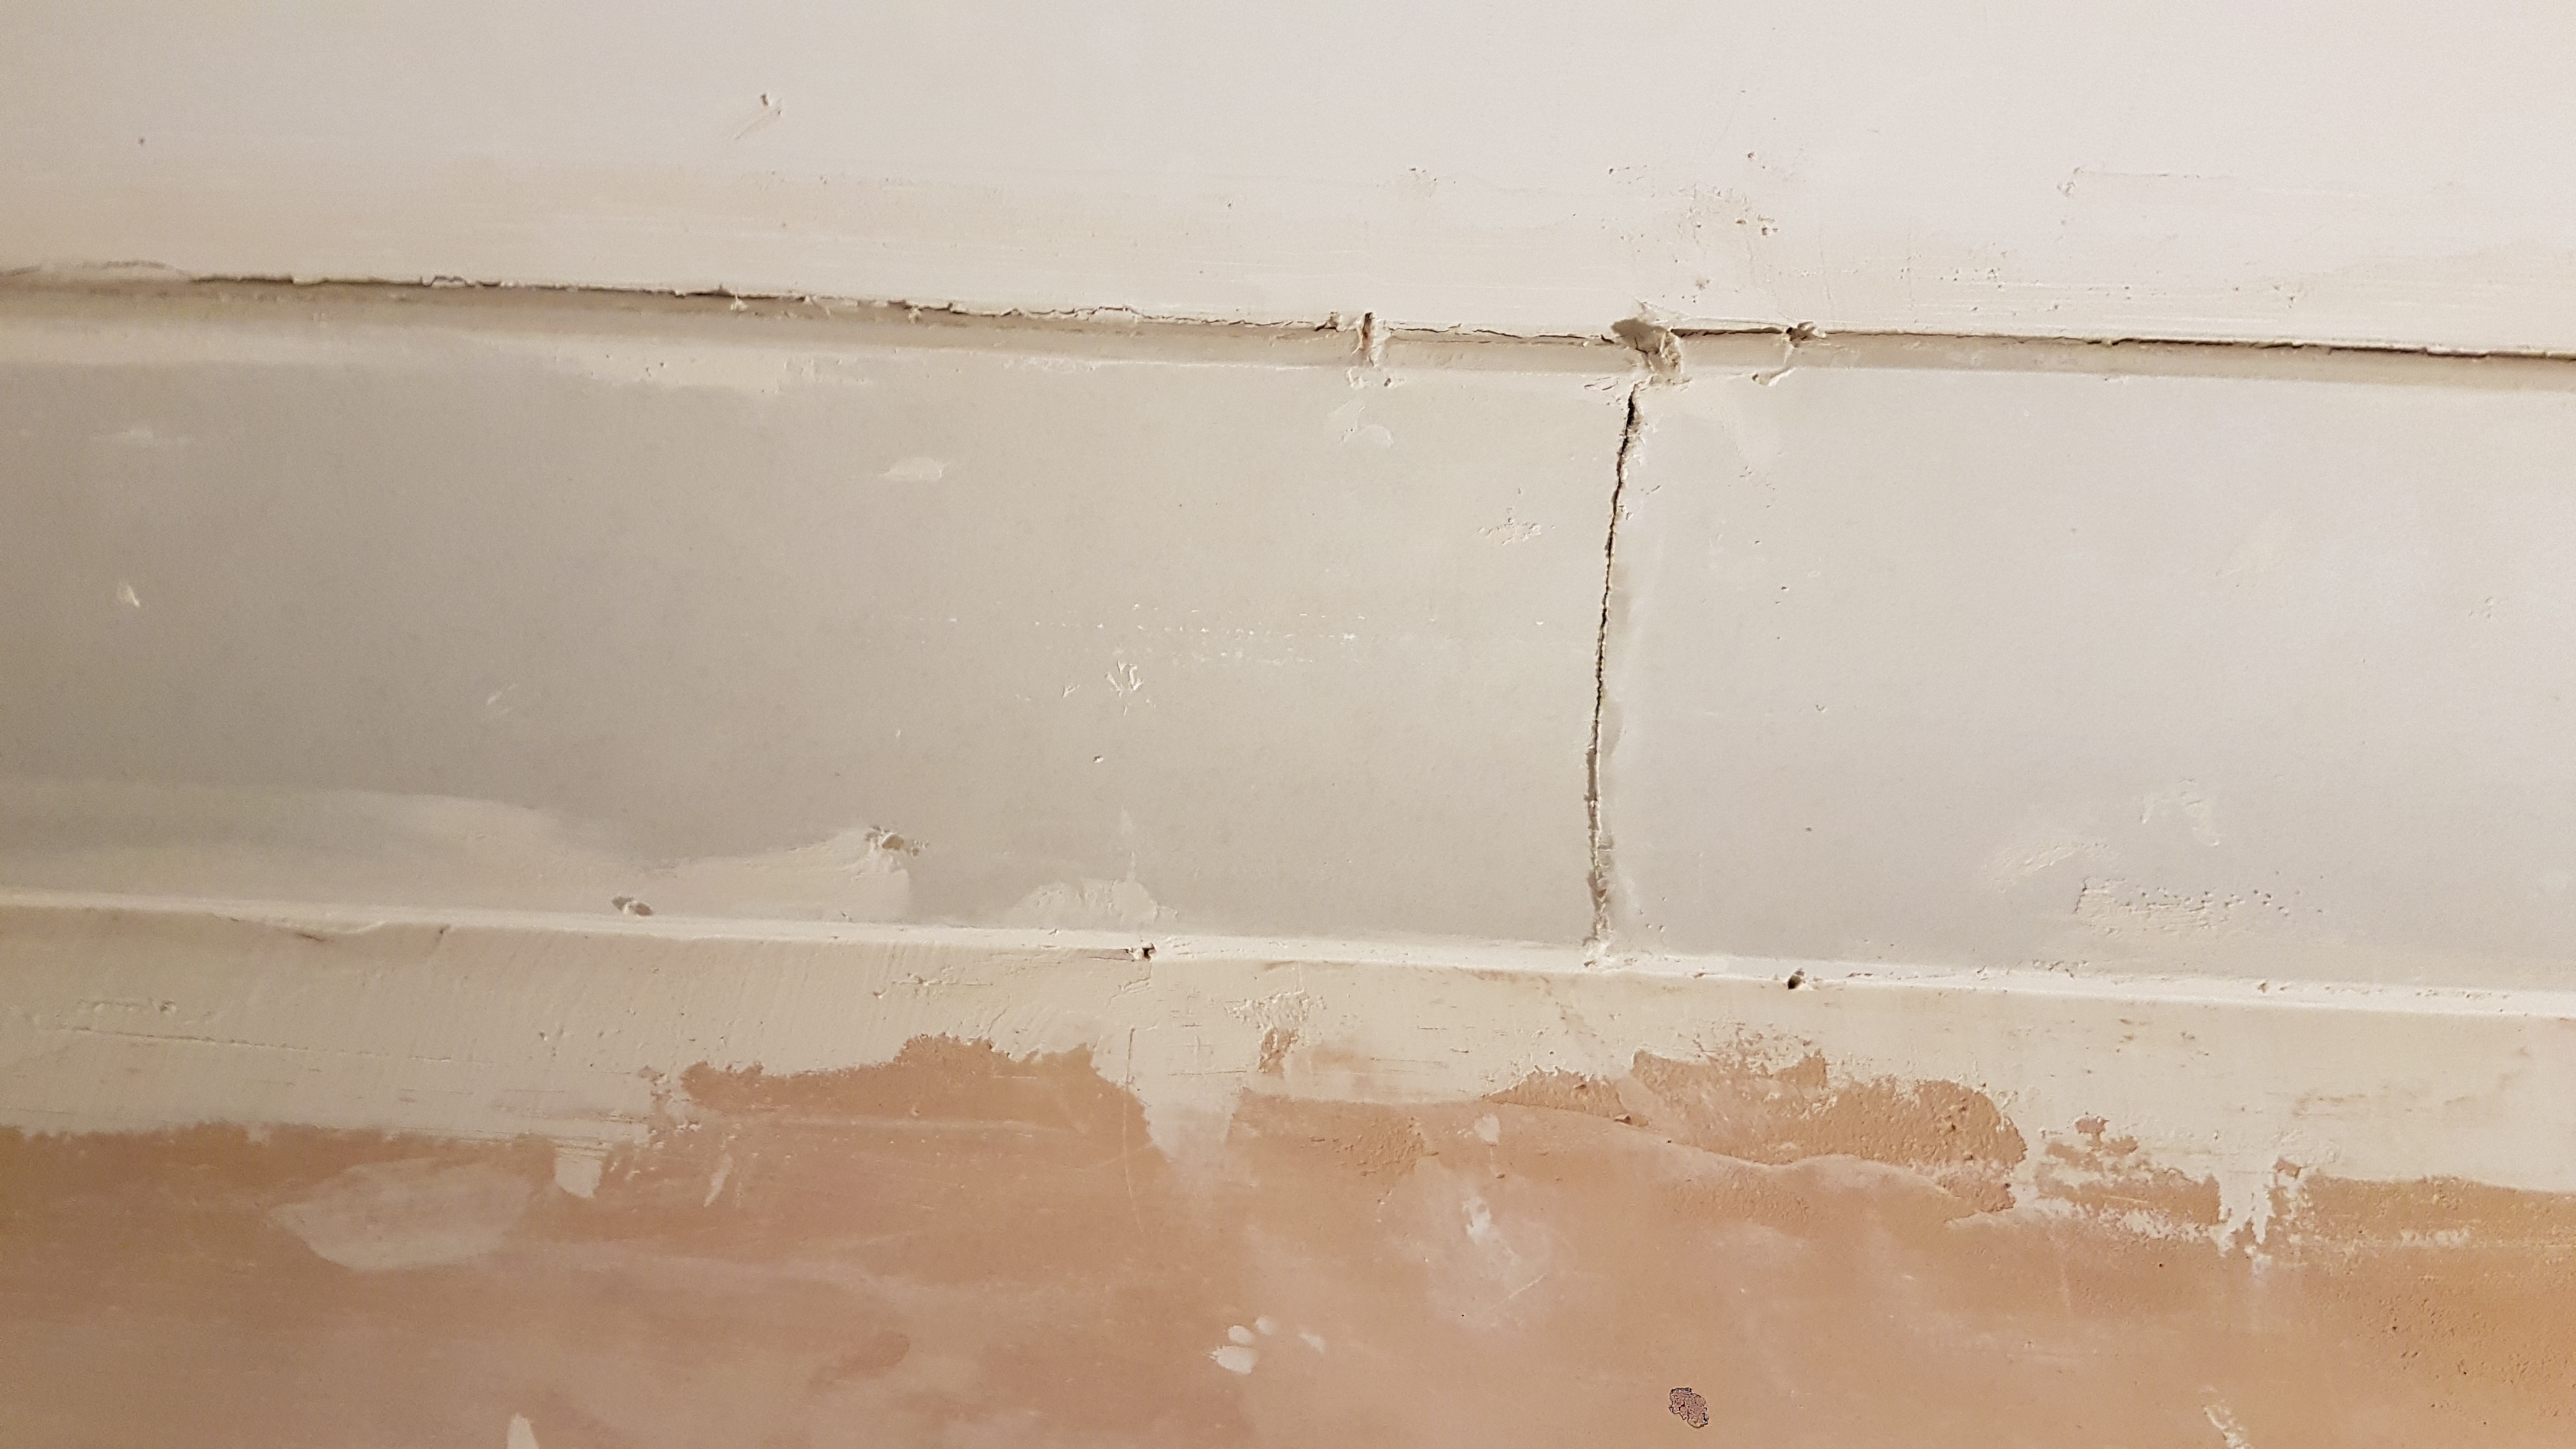 Has the plasterer botched this job?